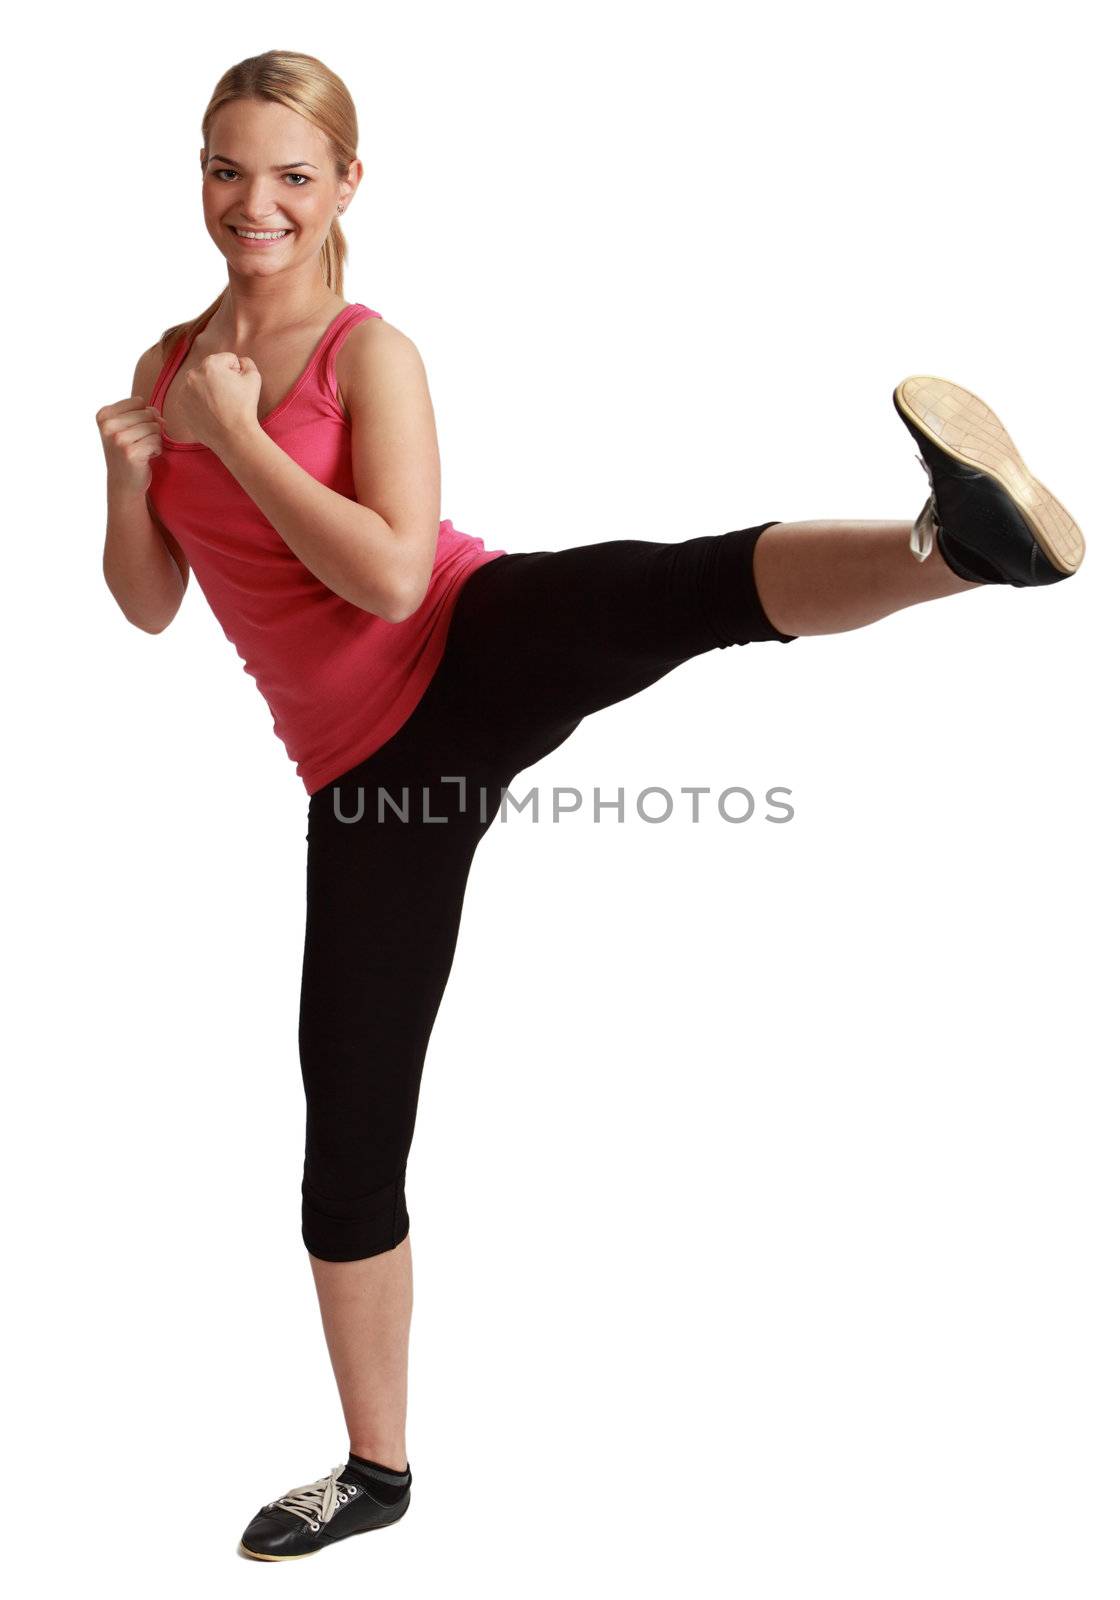 Young blonde woman kickboxing against a white background.